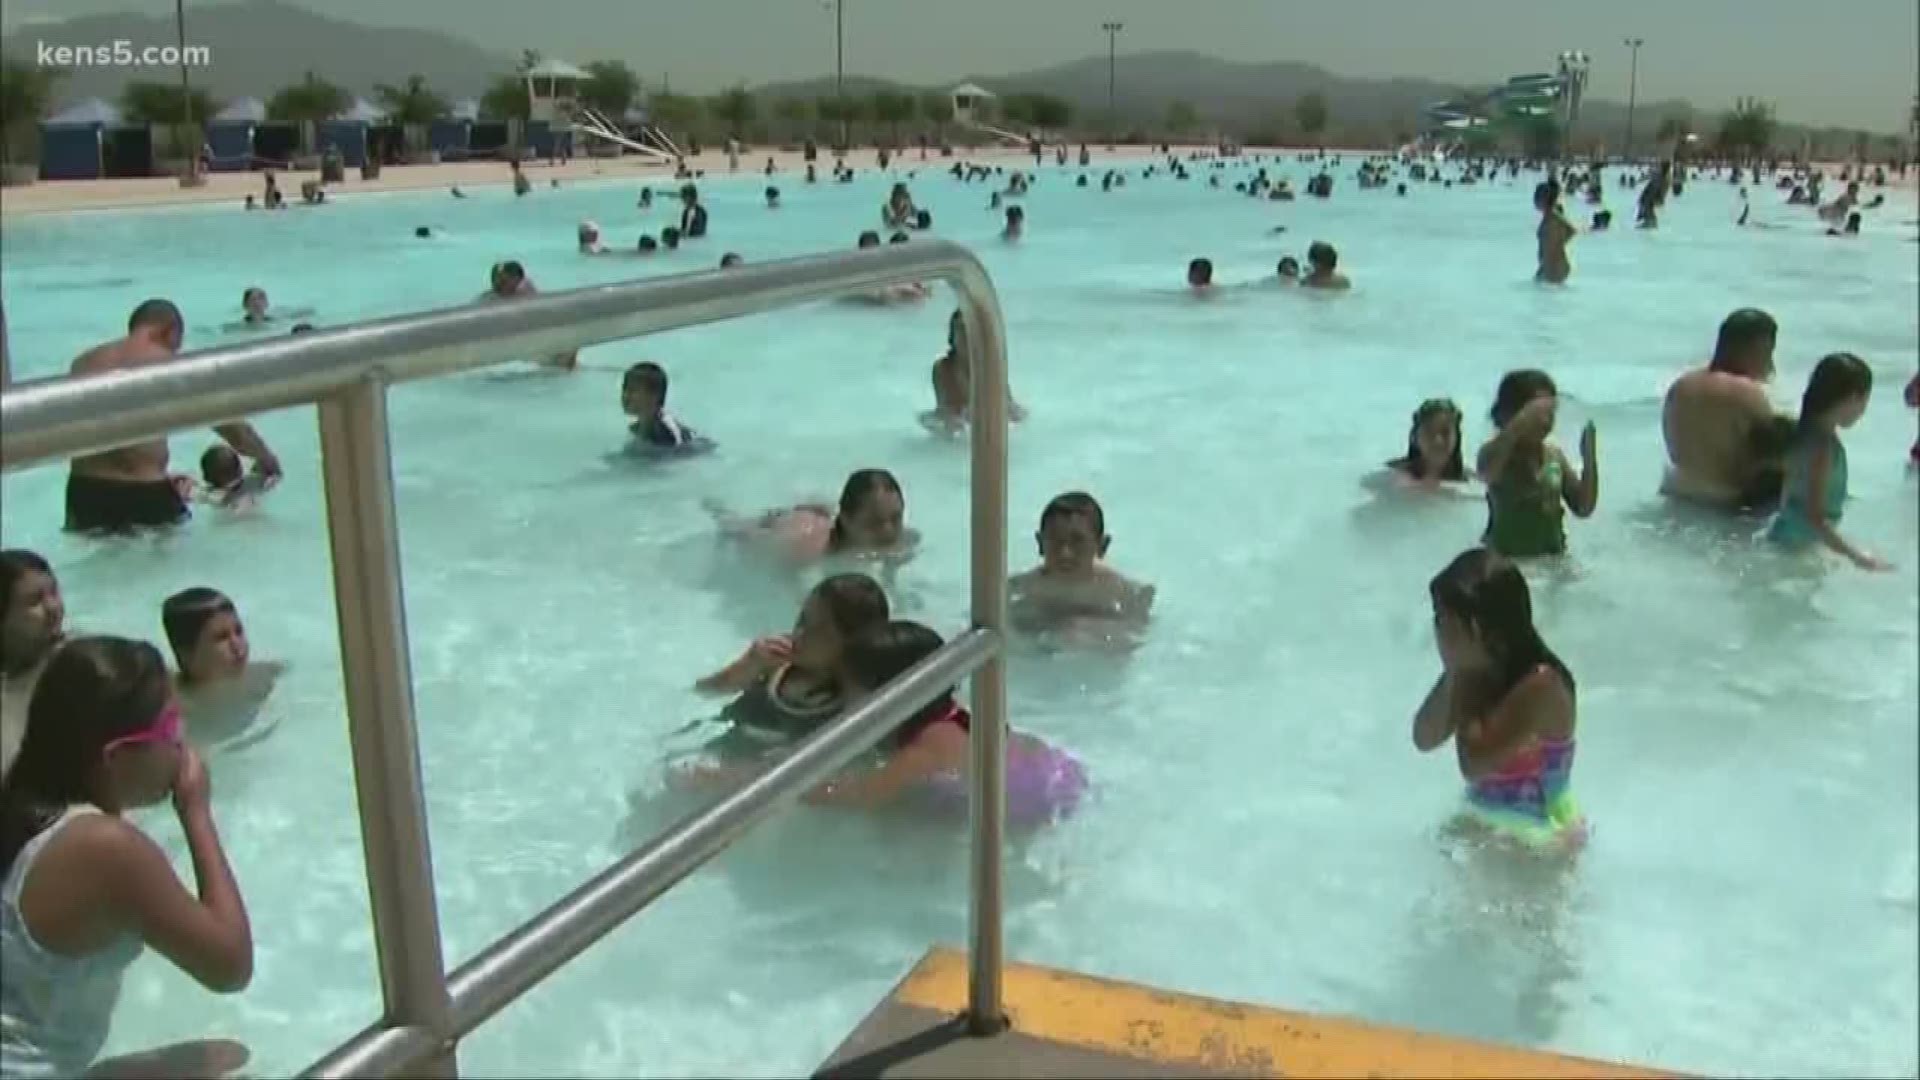 The summer season is winding down but you still have time to hit the pool. San Antonio Parks and Recreation is extending its pool season.